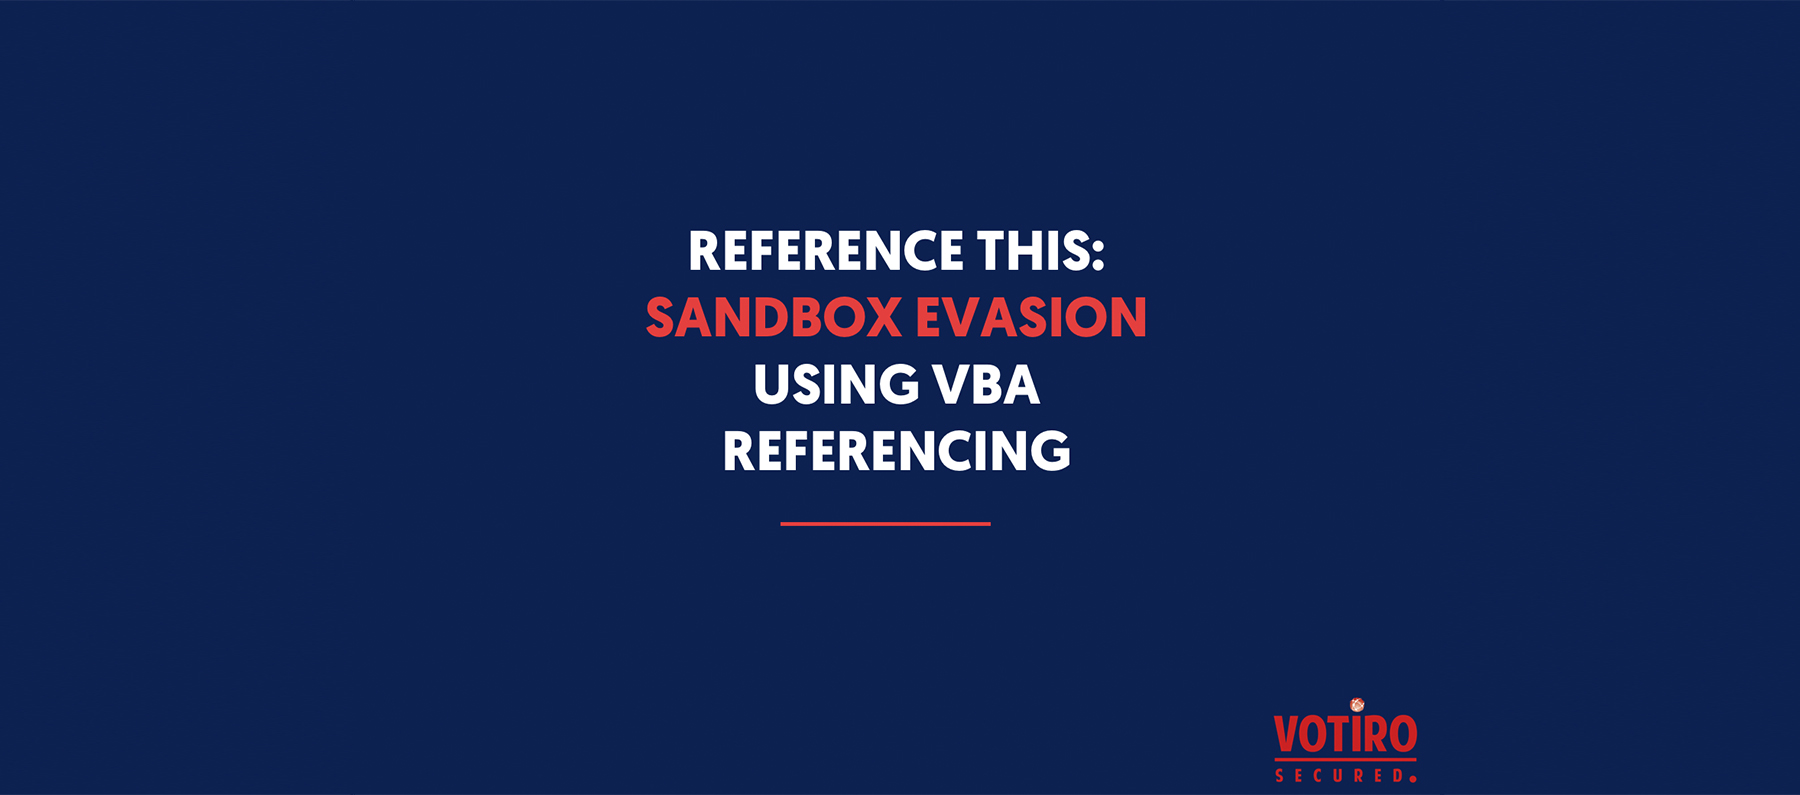 Dark blue background with text in center that reads "Reference This: Sandbox Evasion Using VBA Reference" and a logo of "Votiro Secured." in bottom right